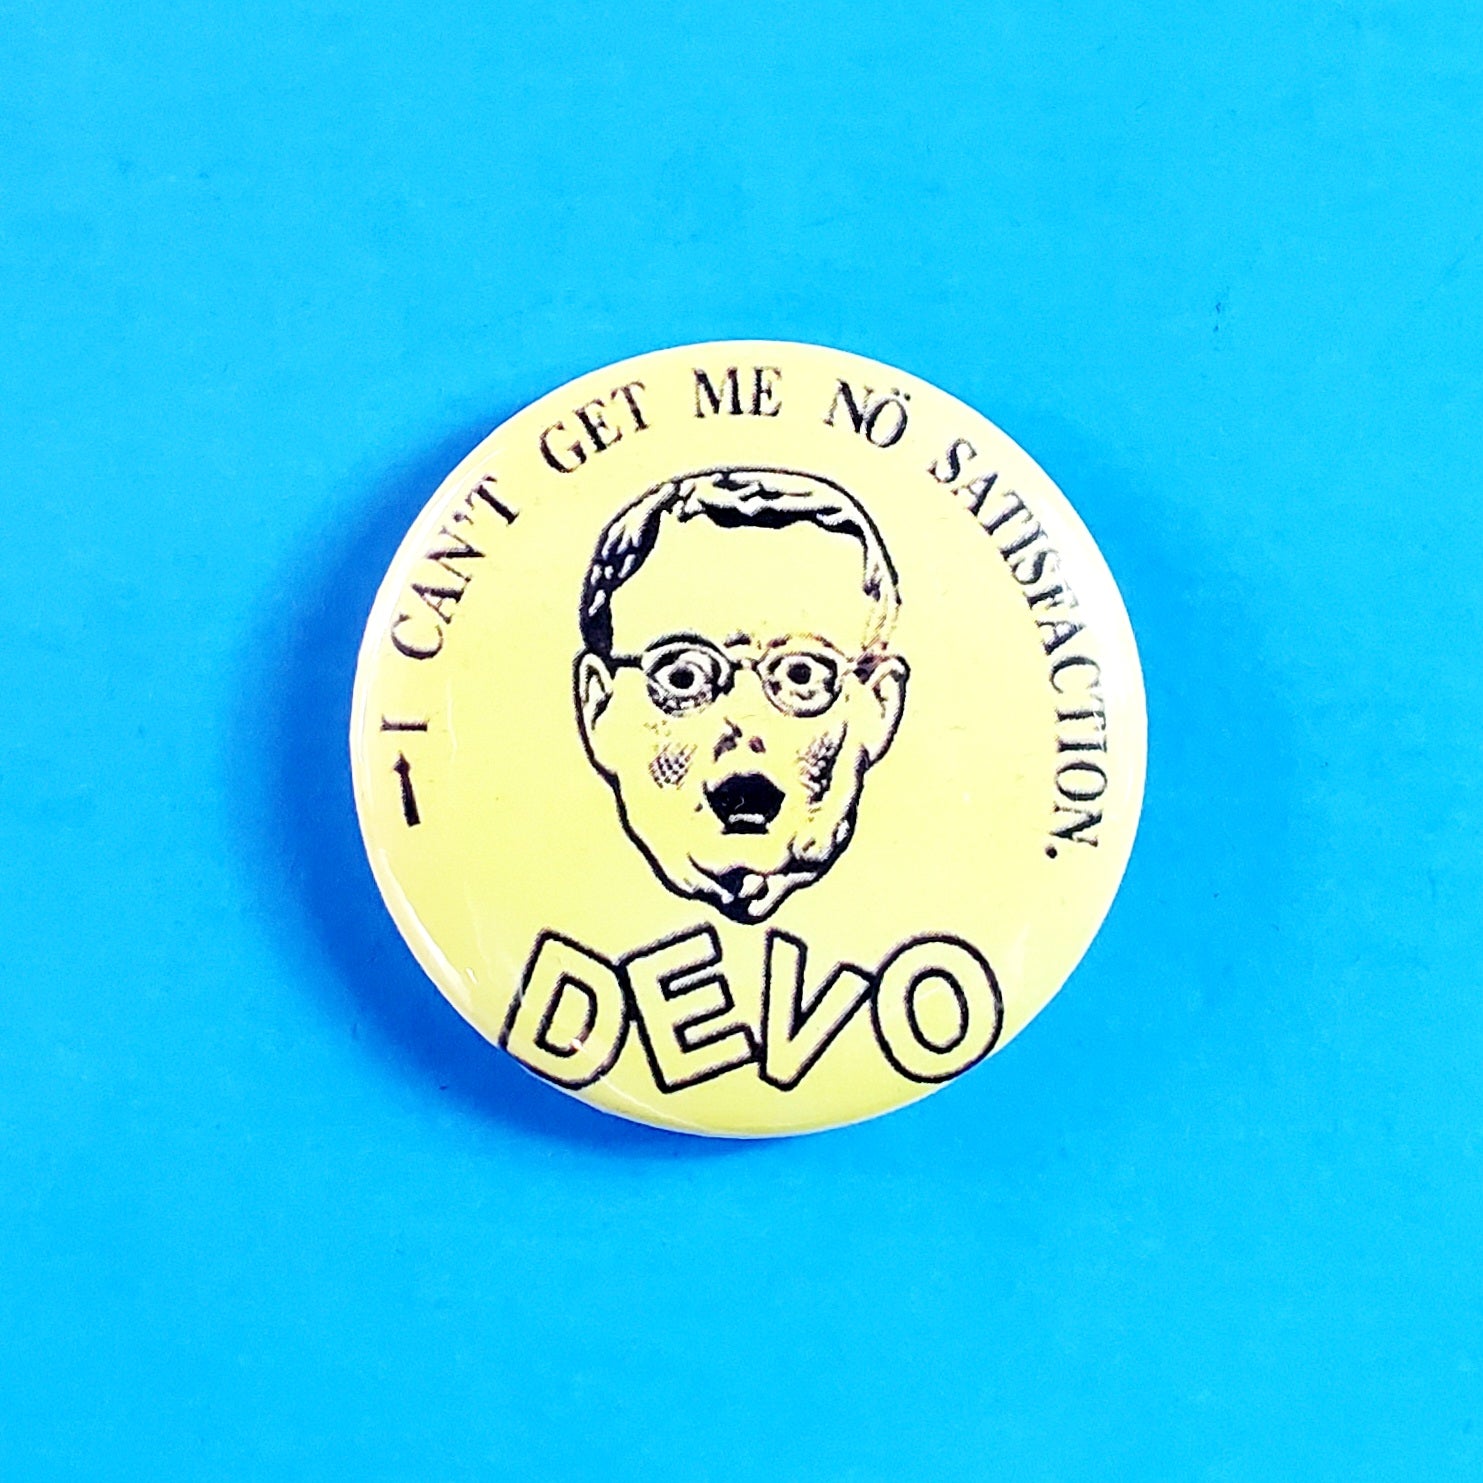 Devo “I Can’t Get Me No Satisfaction” 2.25" Button